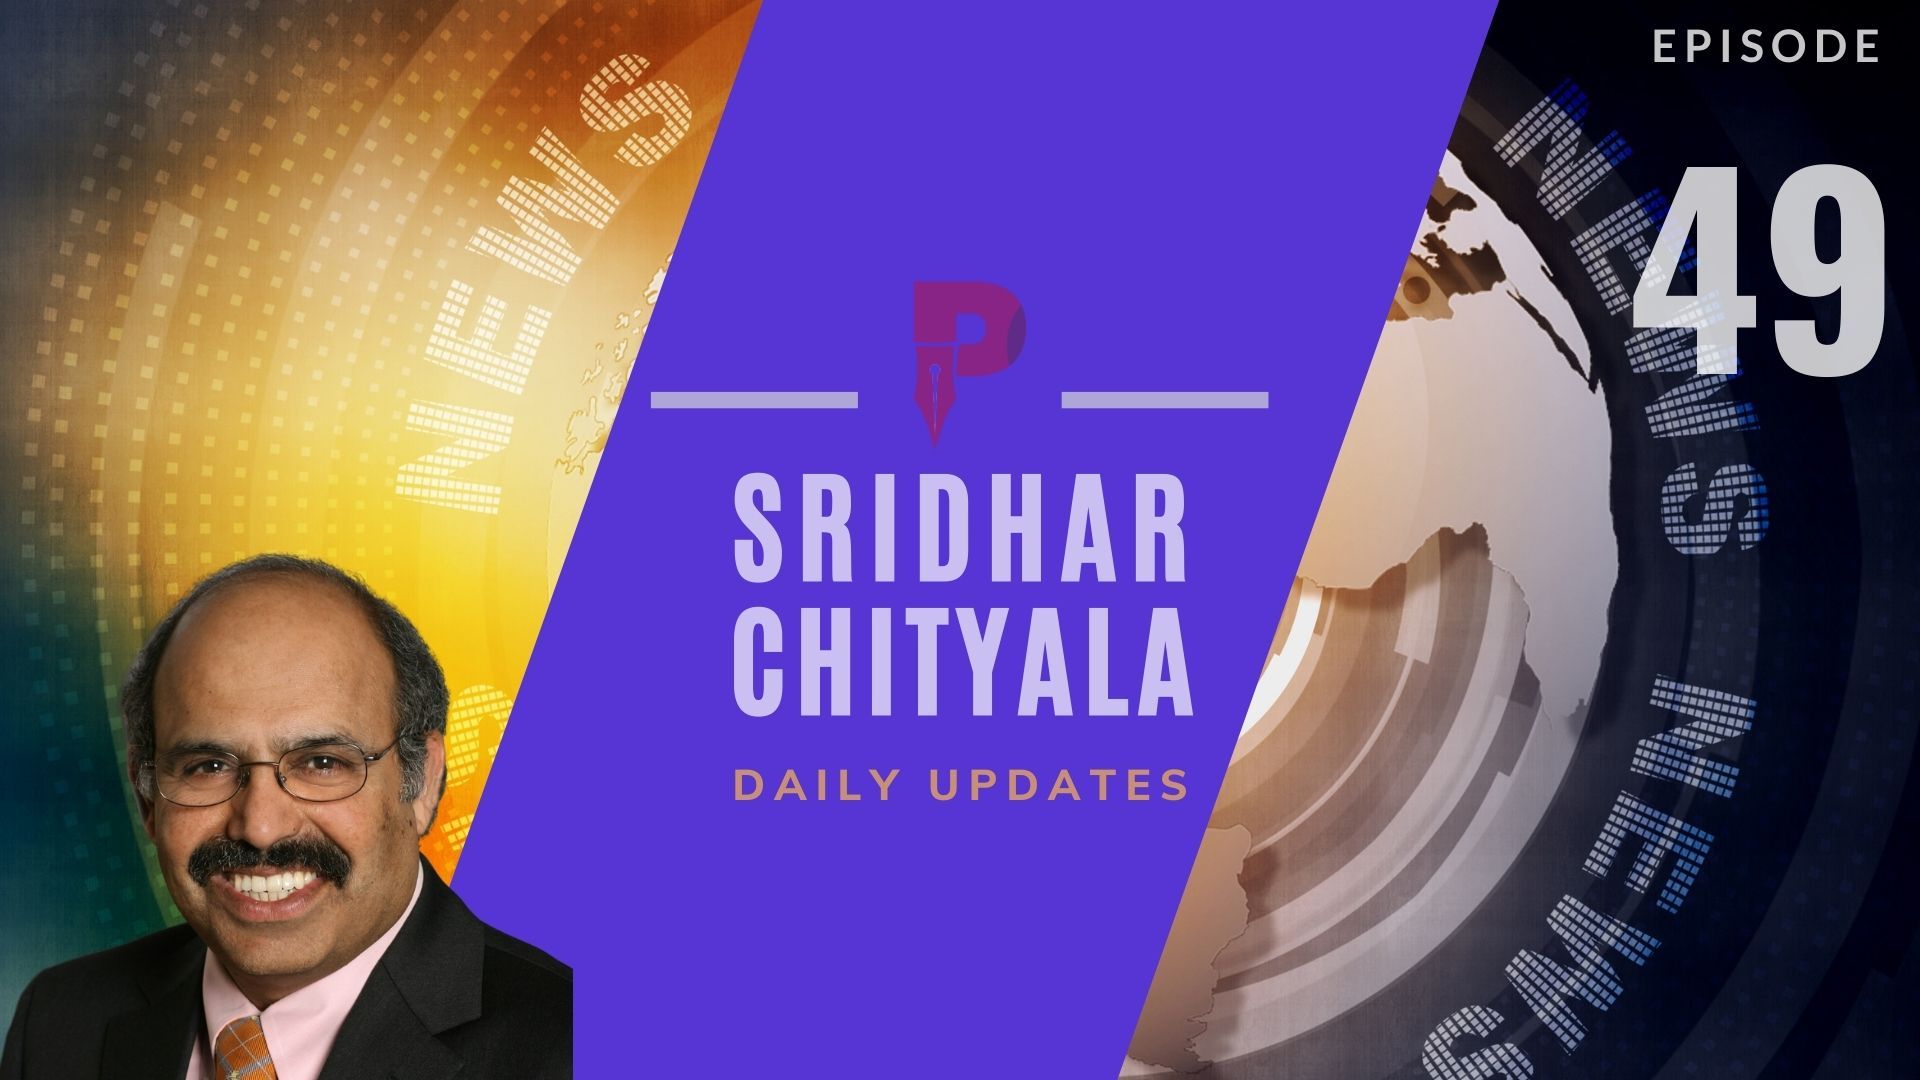 Episode 48 Covid cases rise, update on WI, PA, MI, GA and China with Sridhar Chityala